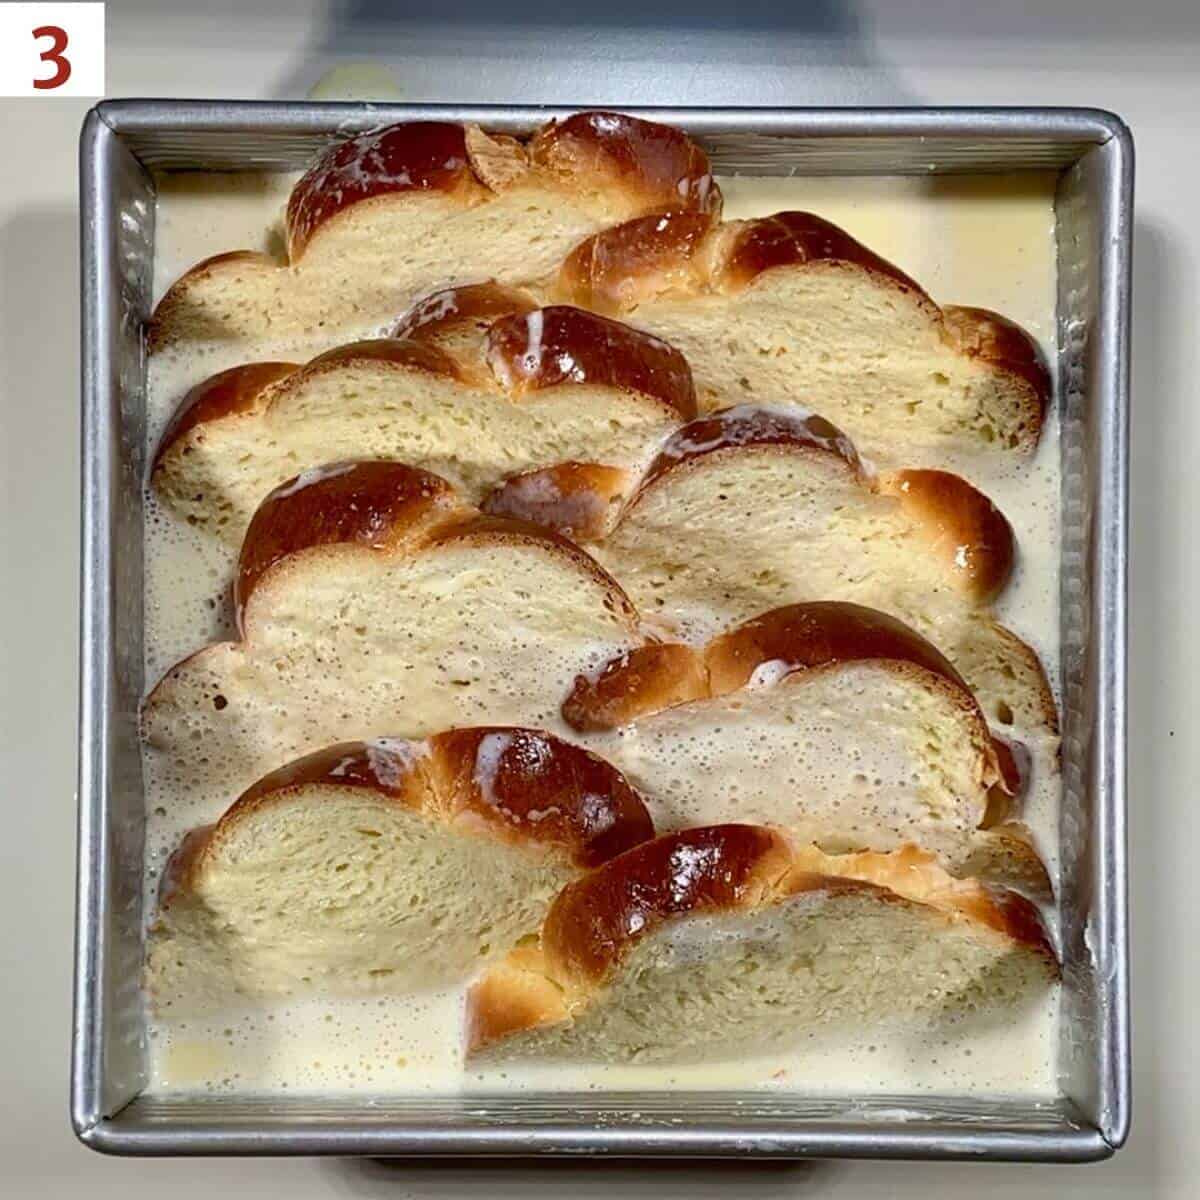 Sliced challah in a pan with custard poured on.